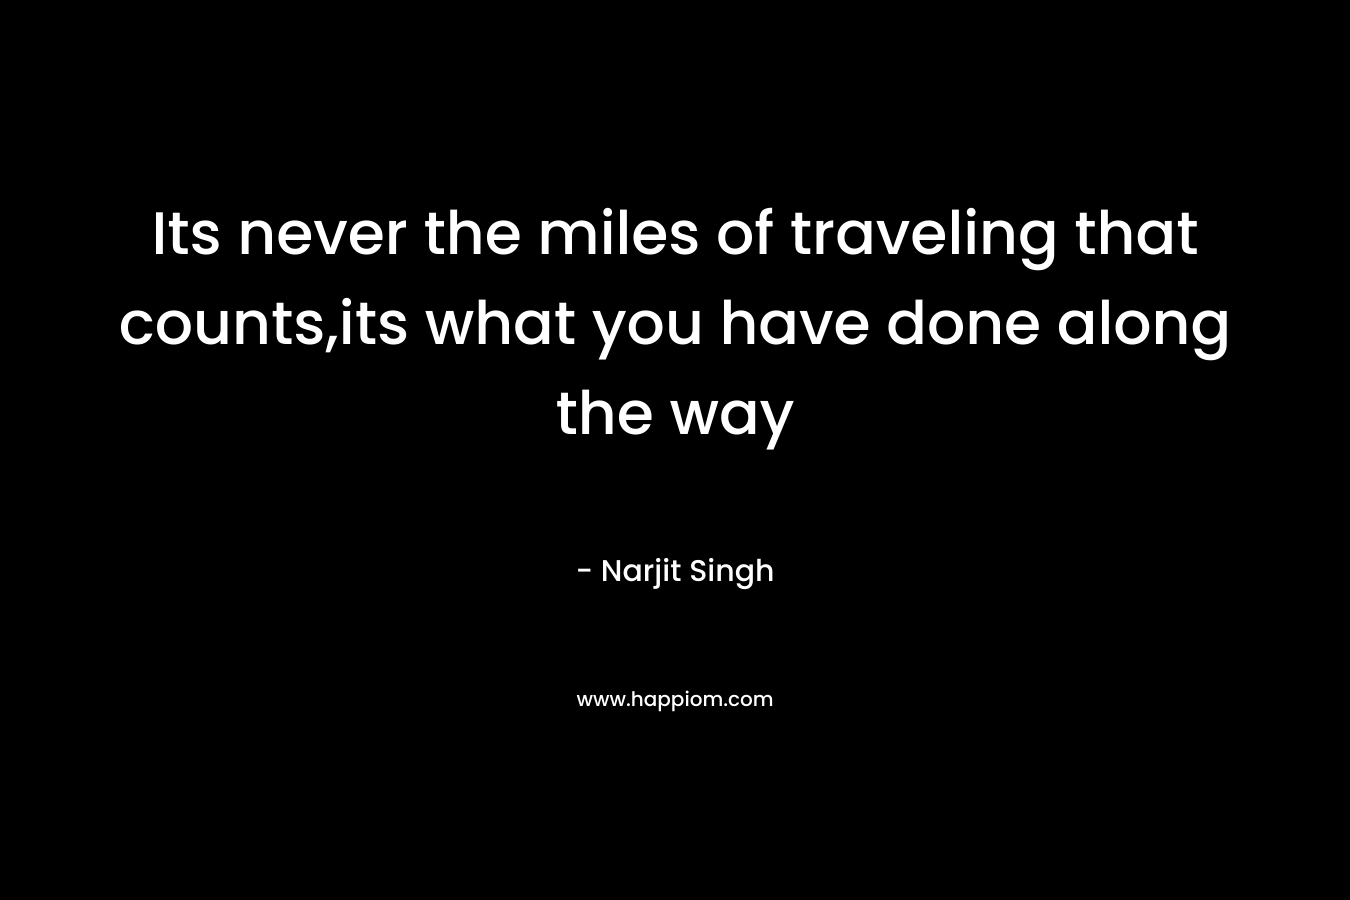 Its never the miles of traveling that counts,its what you have done along the way